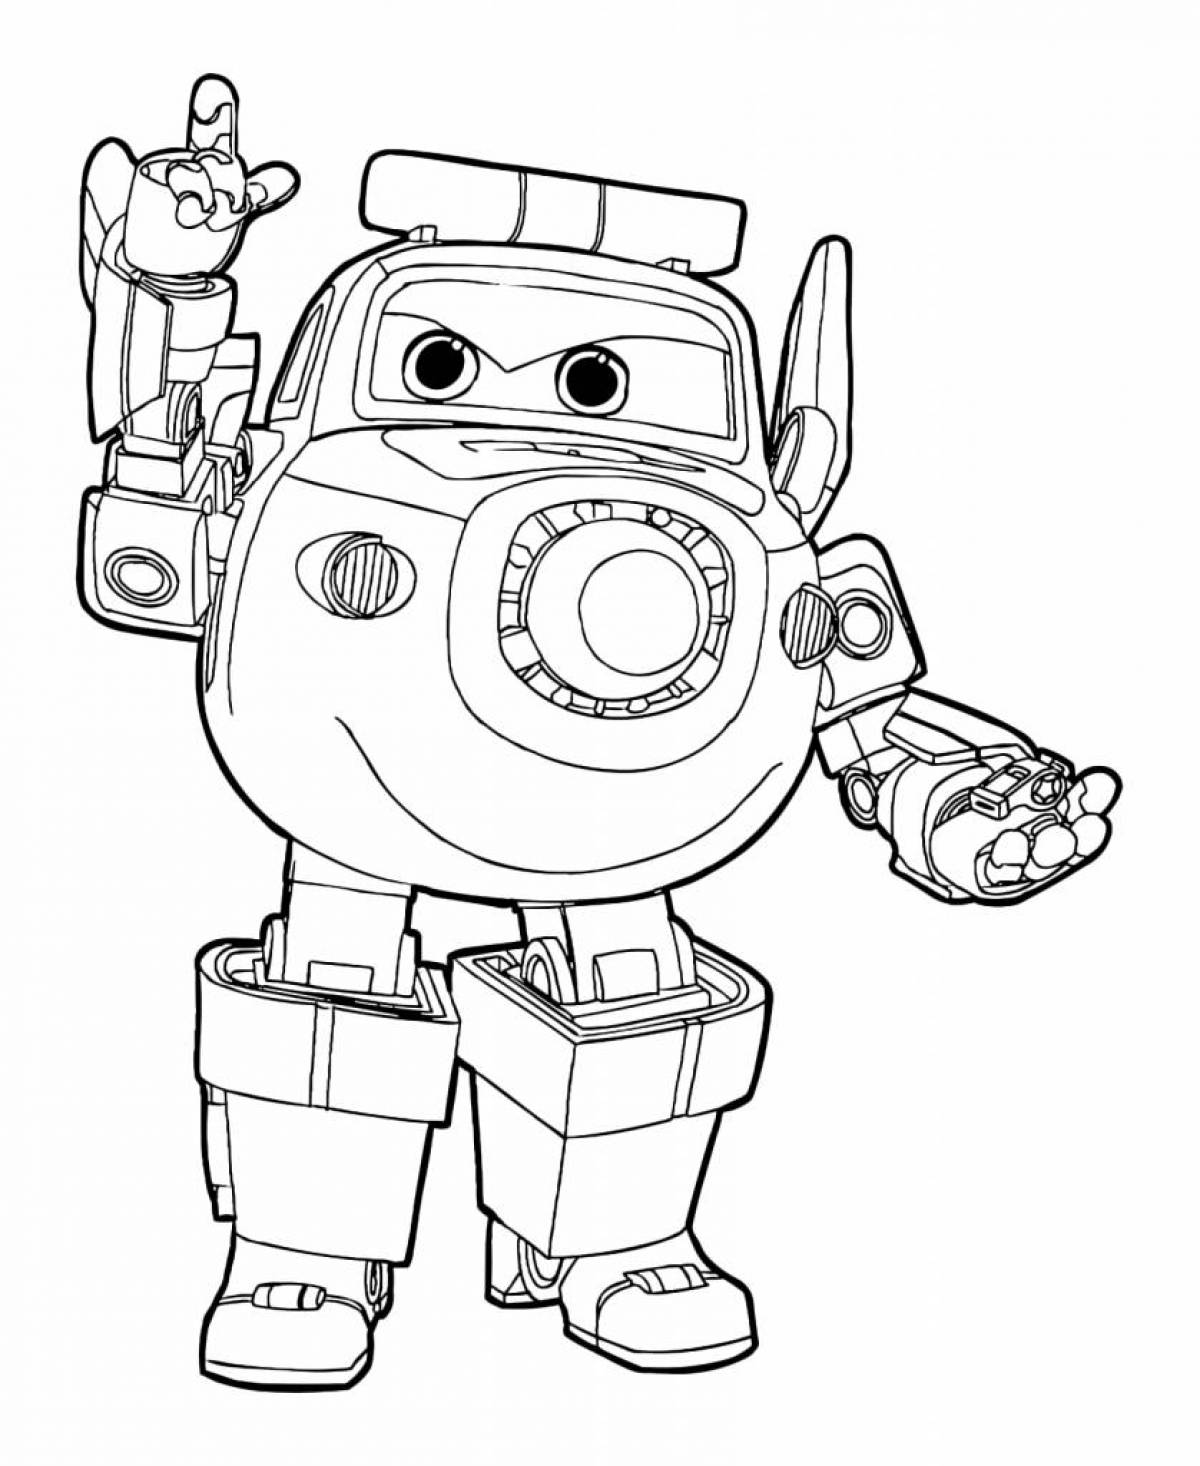 Wonderful super wings coloring pages for kids